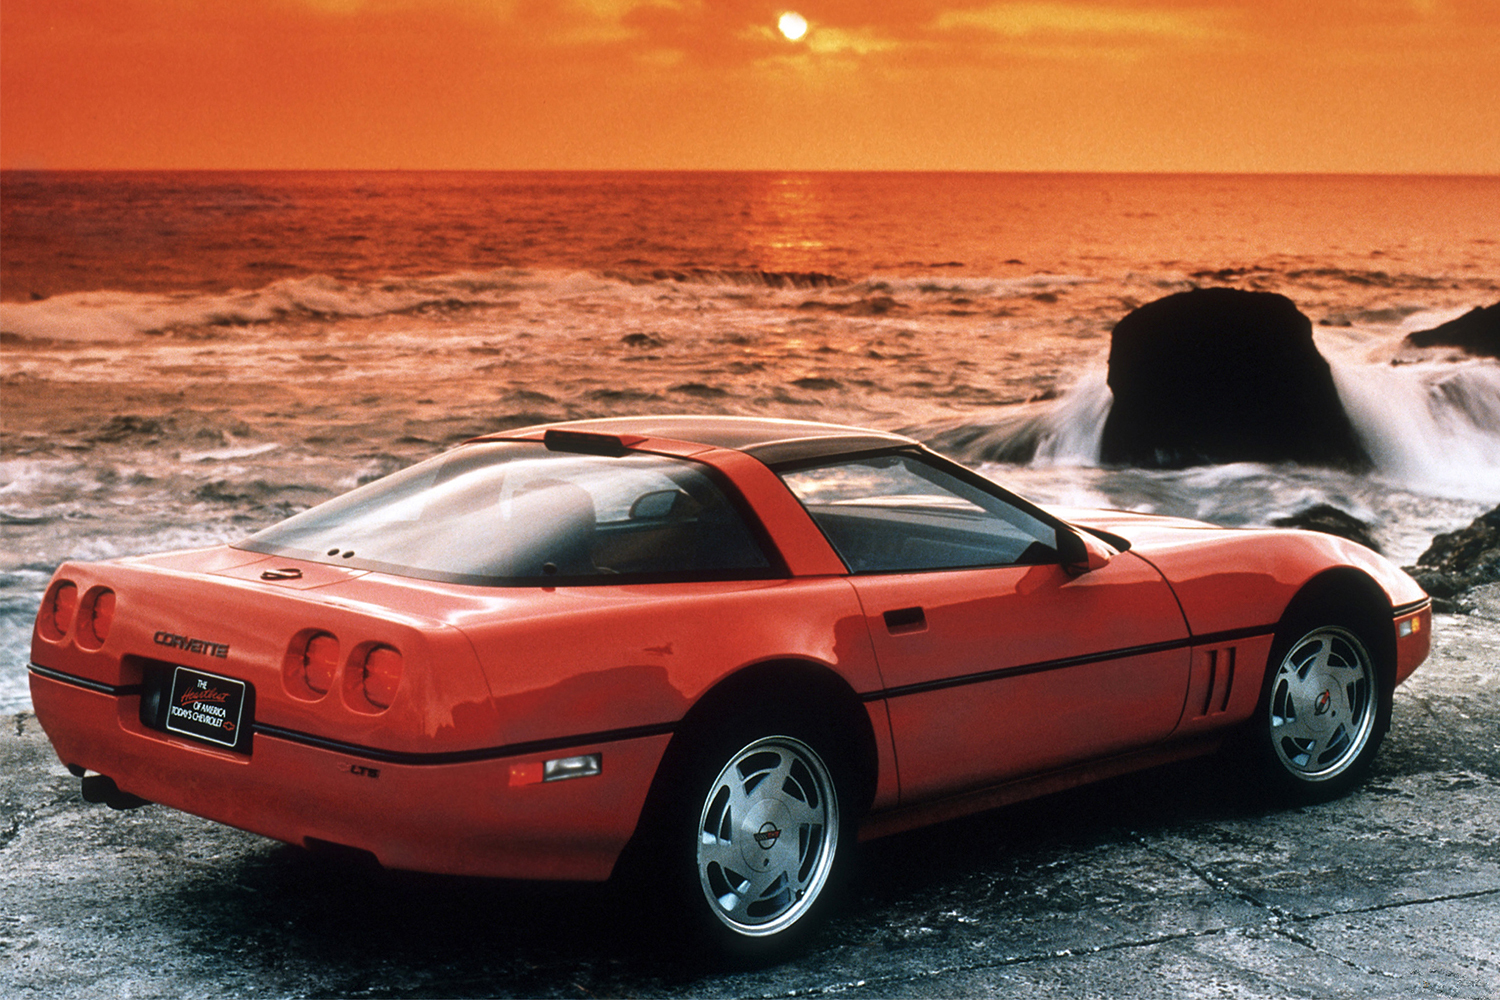 A red 1990 Chevrolet Corvette C4 sitting next to the ocean while the sun sets in an orange sky in the background